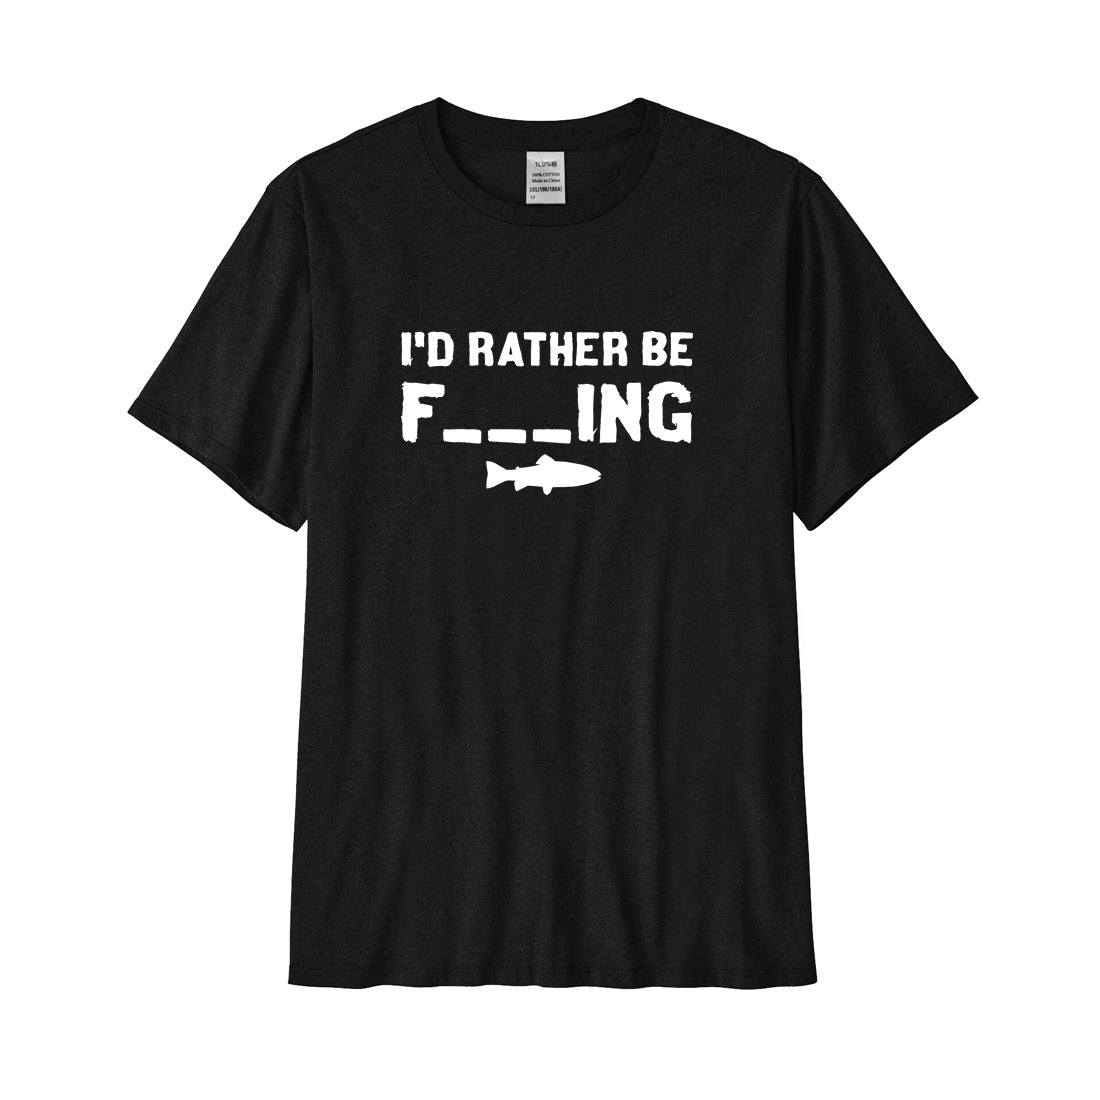 I'D RATHER BE F_ING Performance T-Shirt